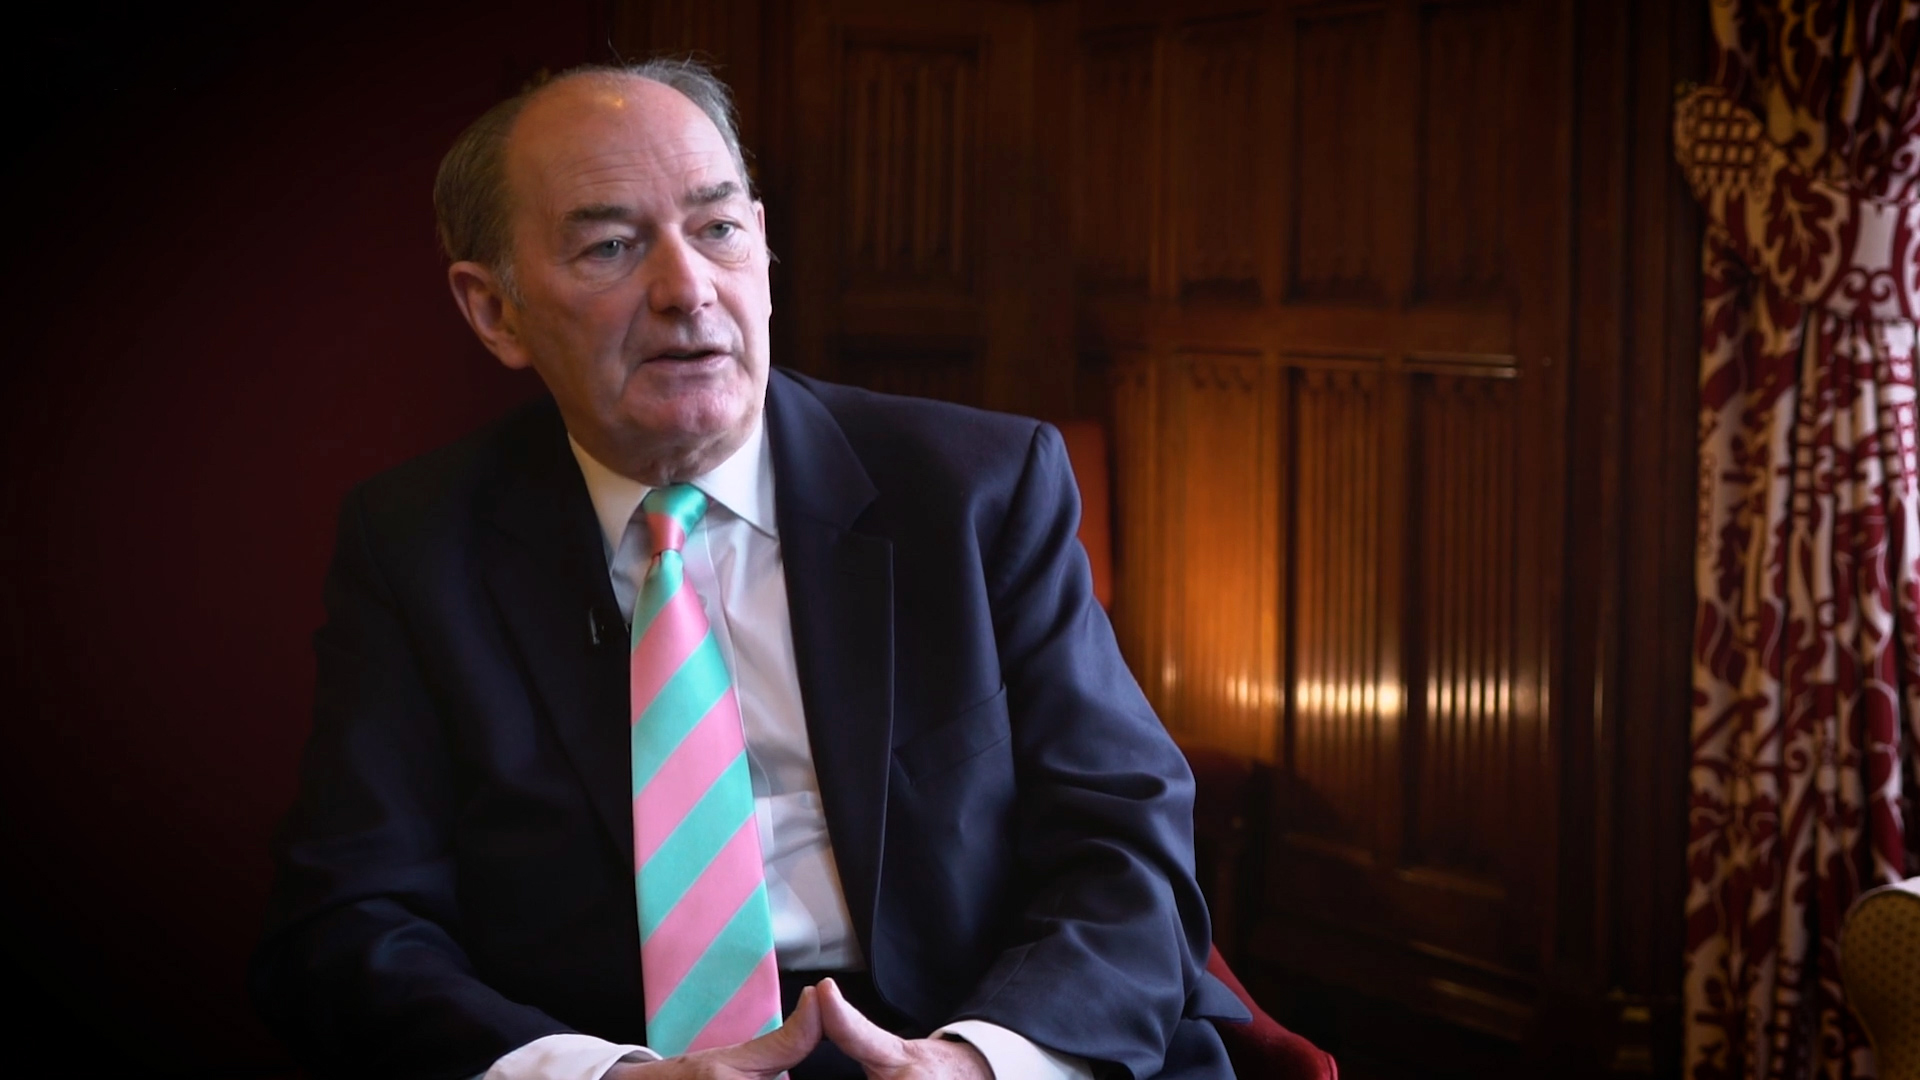 Lord Forsyth is calling for reform in the way the UK is governed.